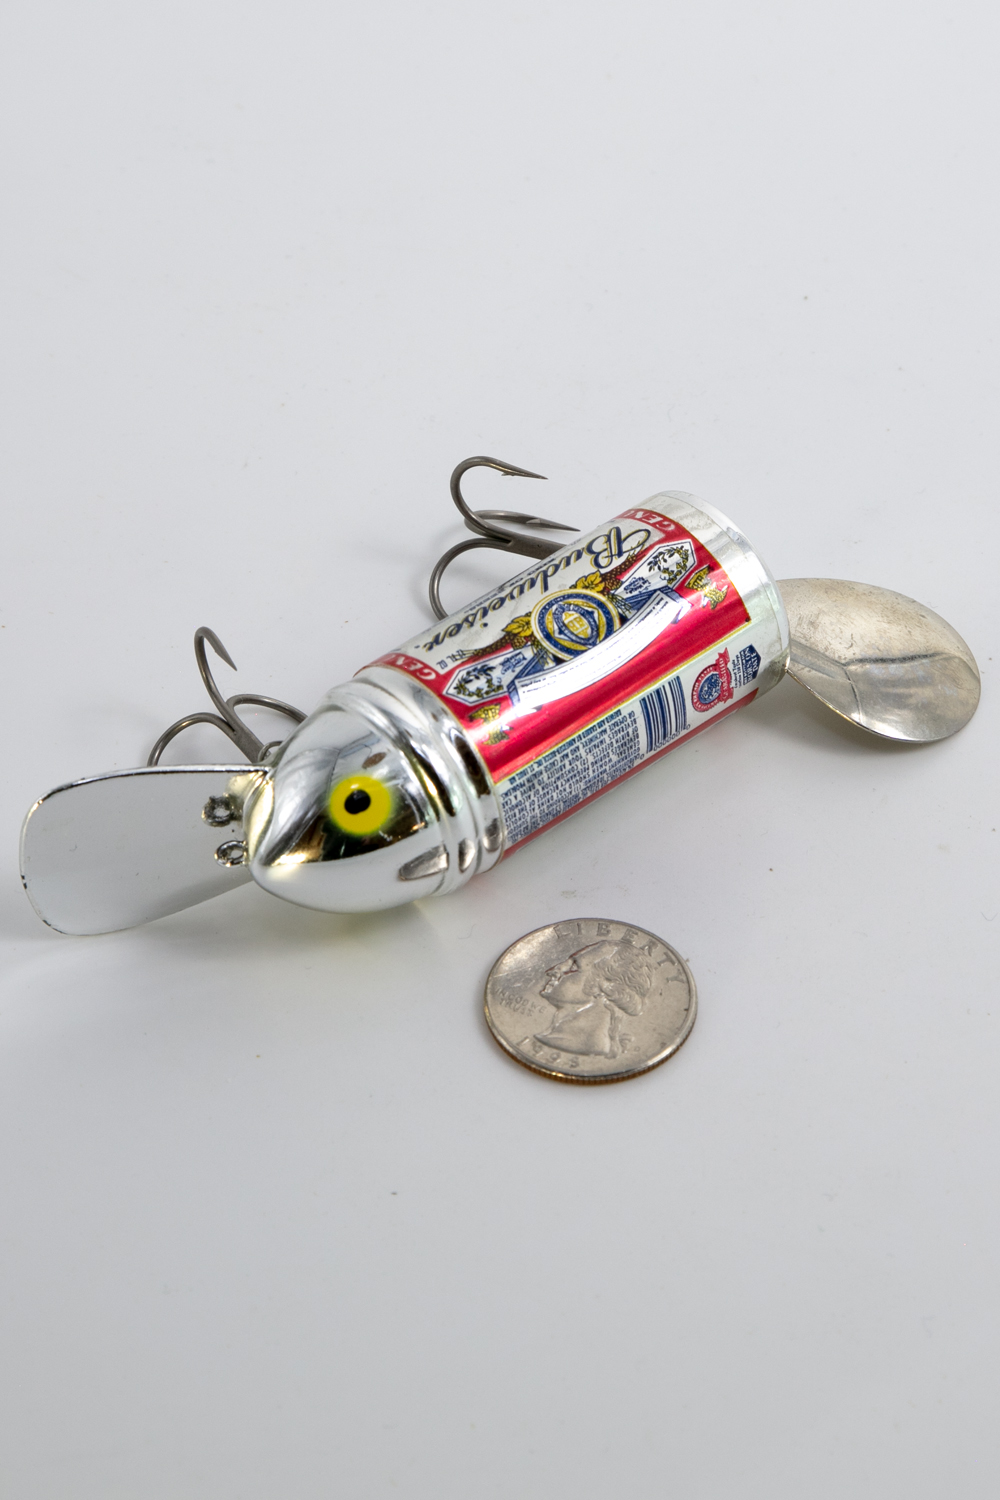 Big Bud Fishing Lures Can't